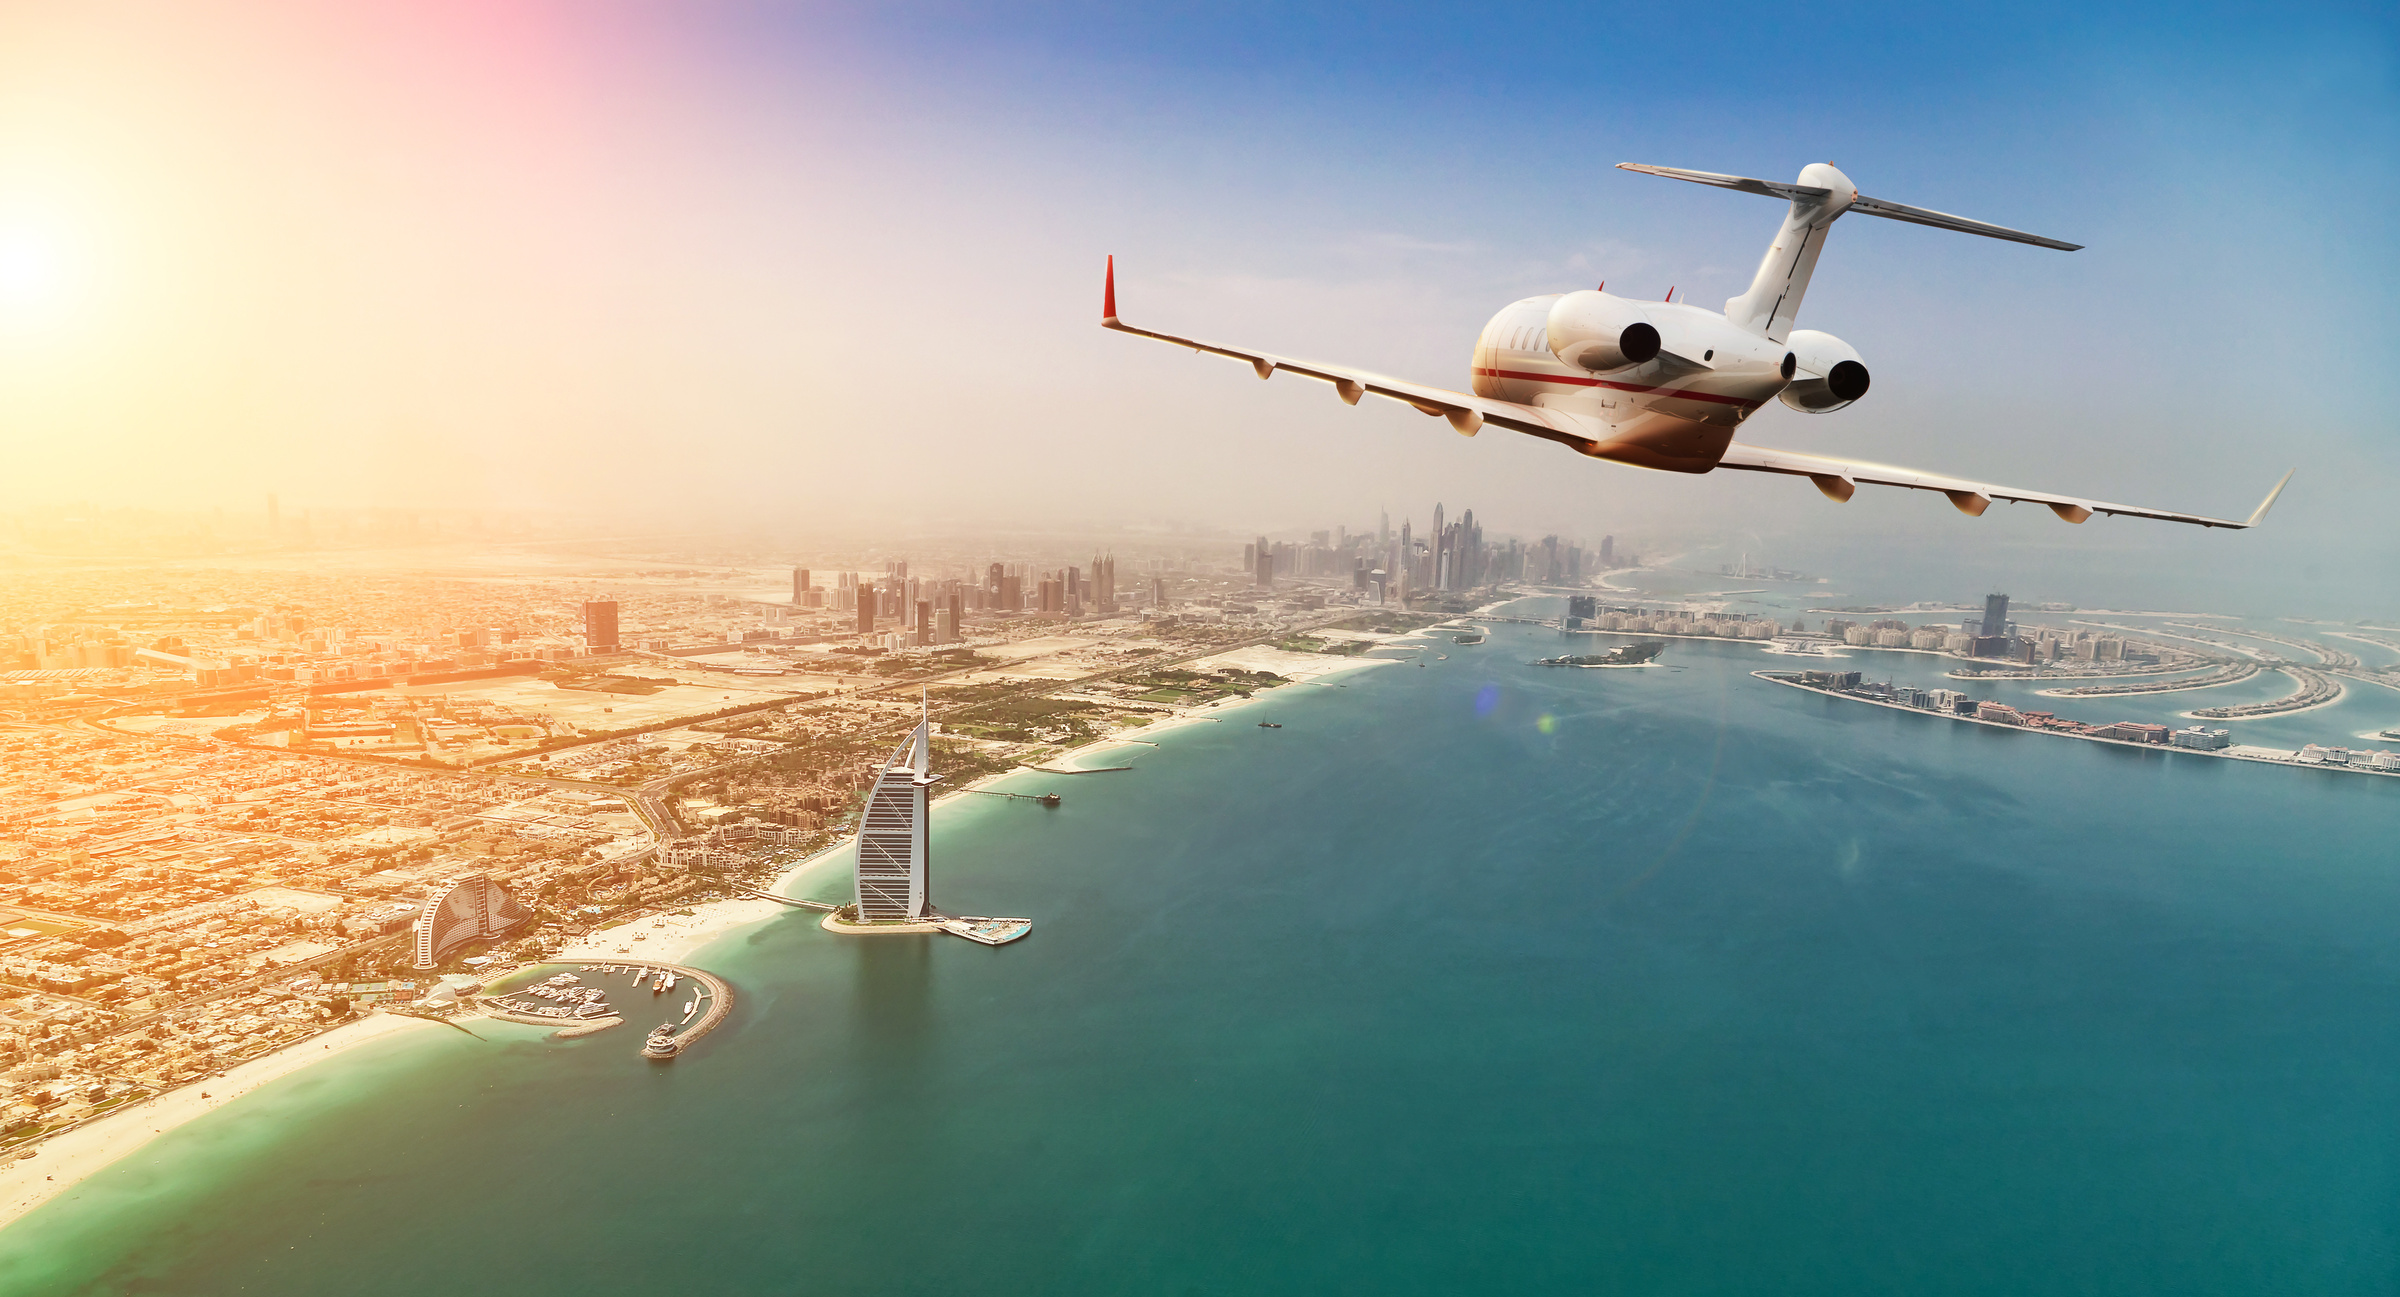 Private jet plane flying above Dubai city in beautiful sunset light.